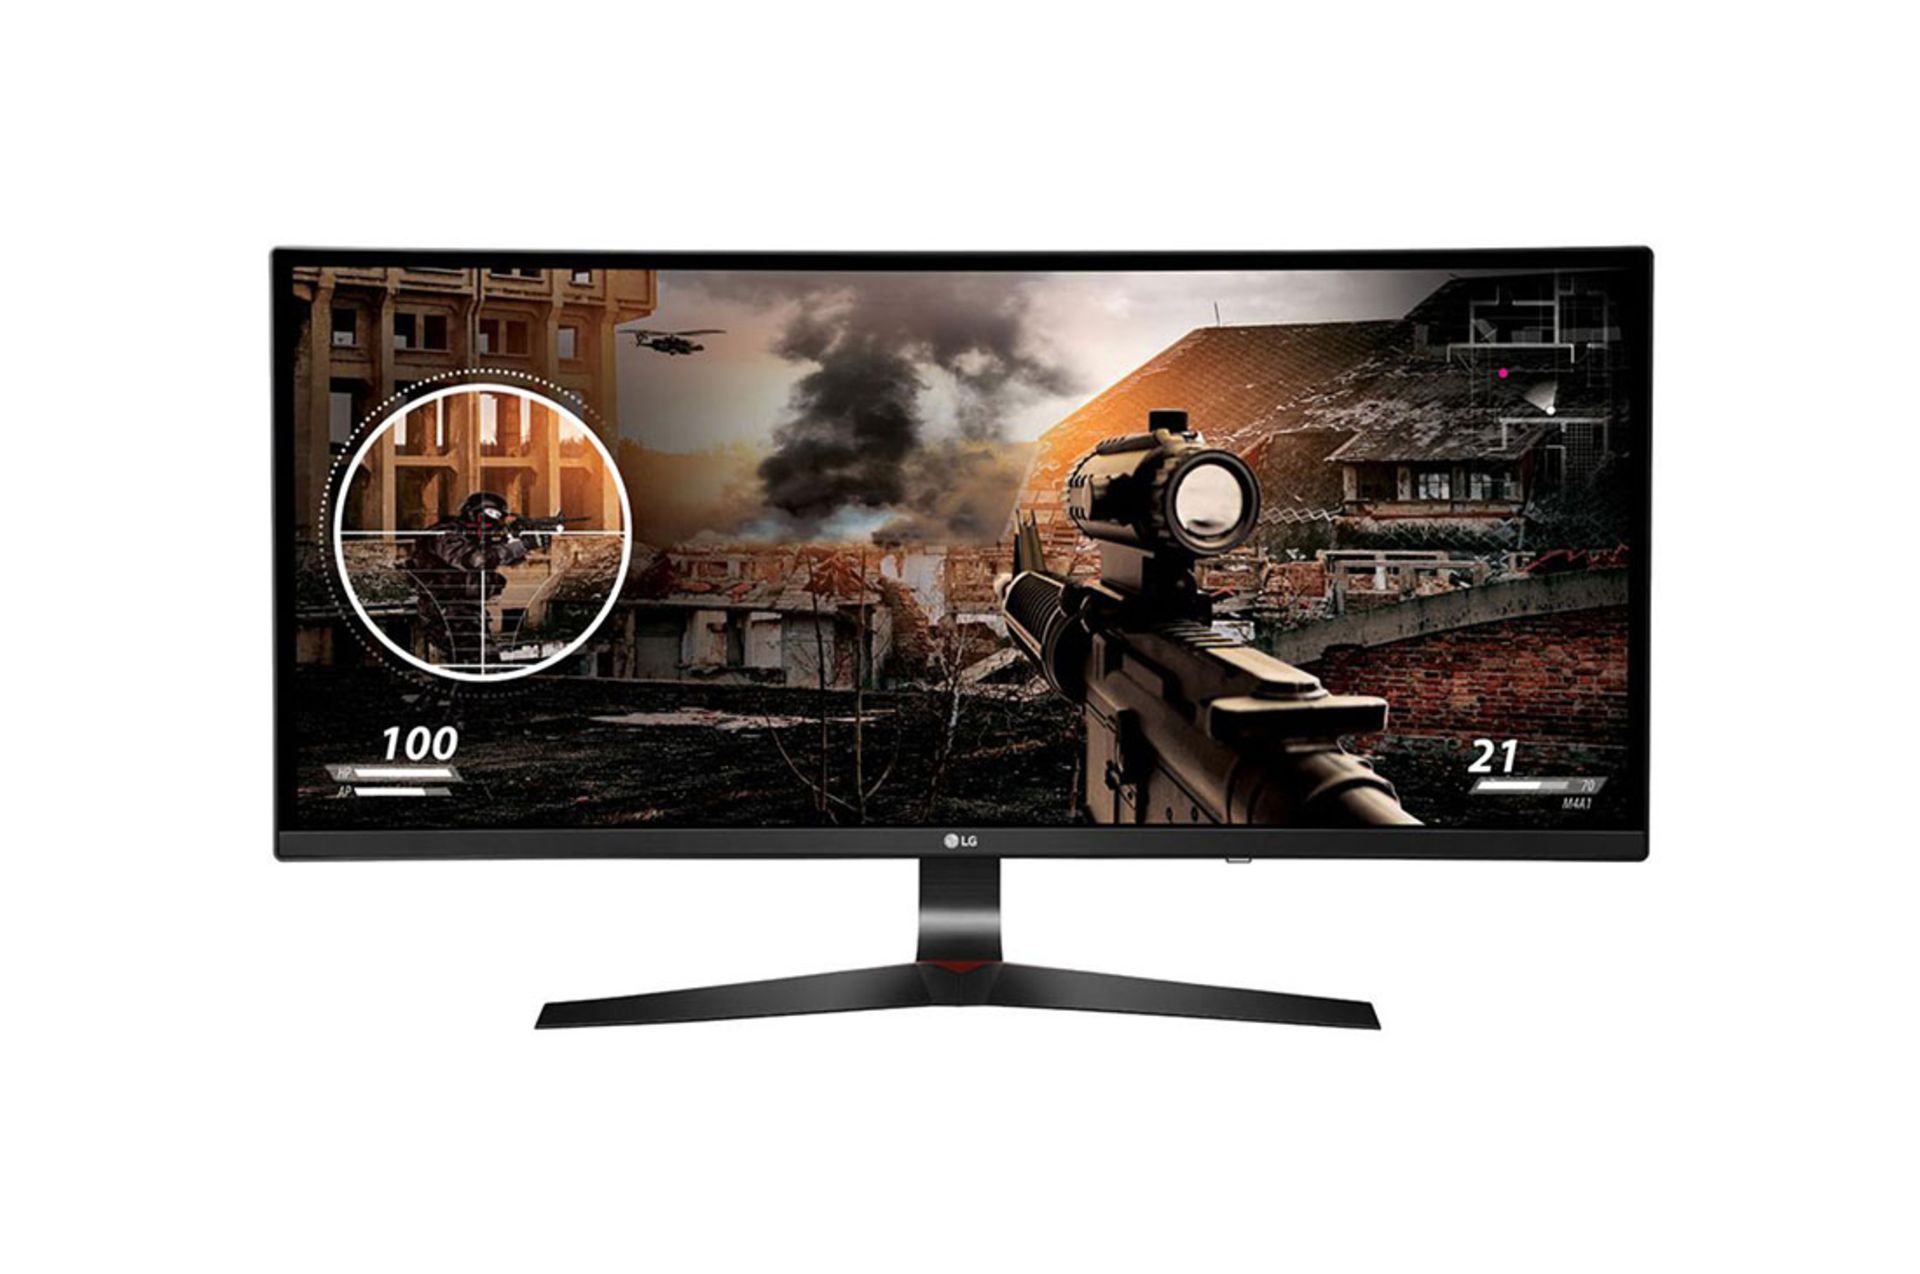 V Grade A LG 34 Inch CURVED ULTRA WIDE WHD IPS LED MONITOR - 2560 x 1080P - HDMI X 2, DISPLAY PORT